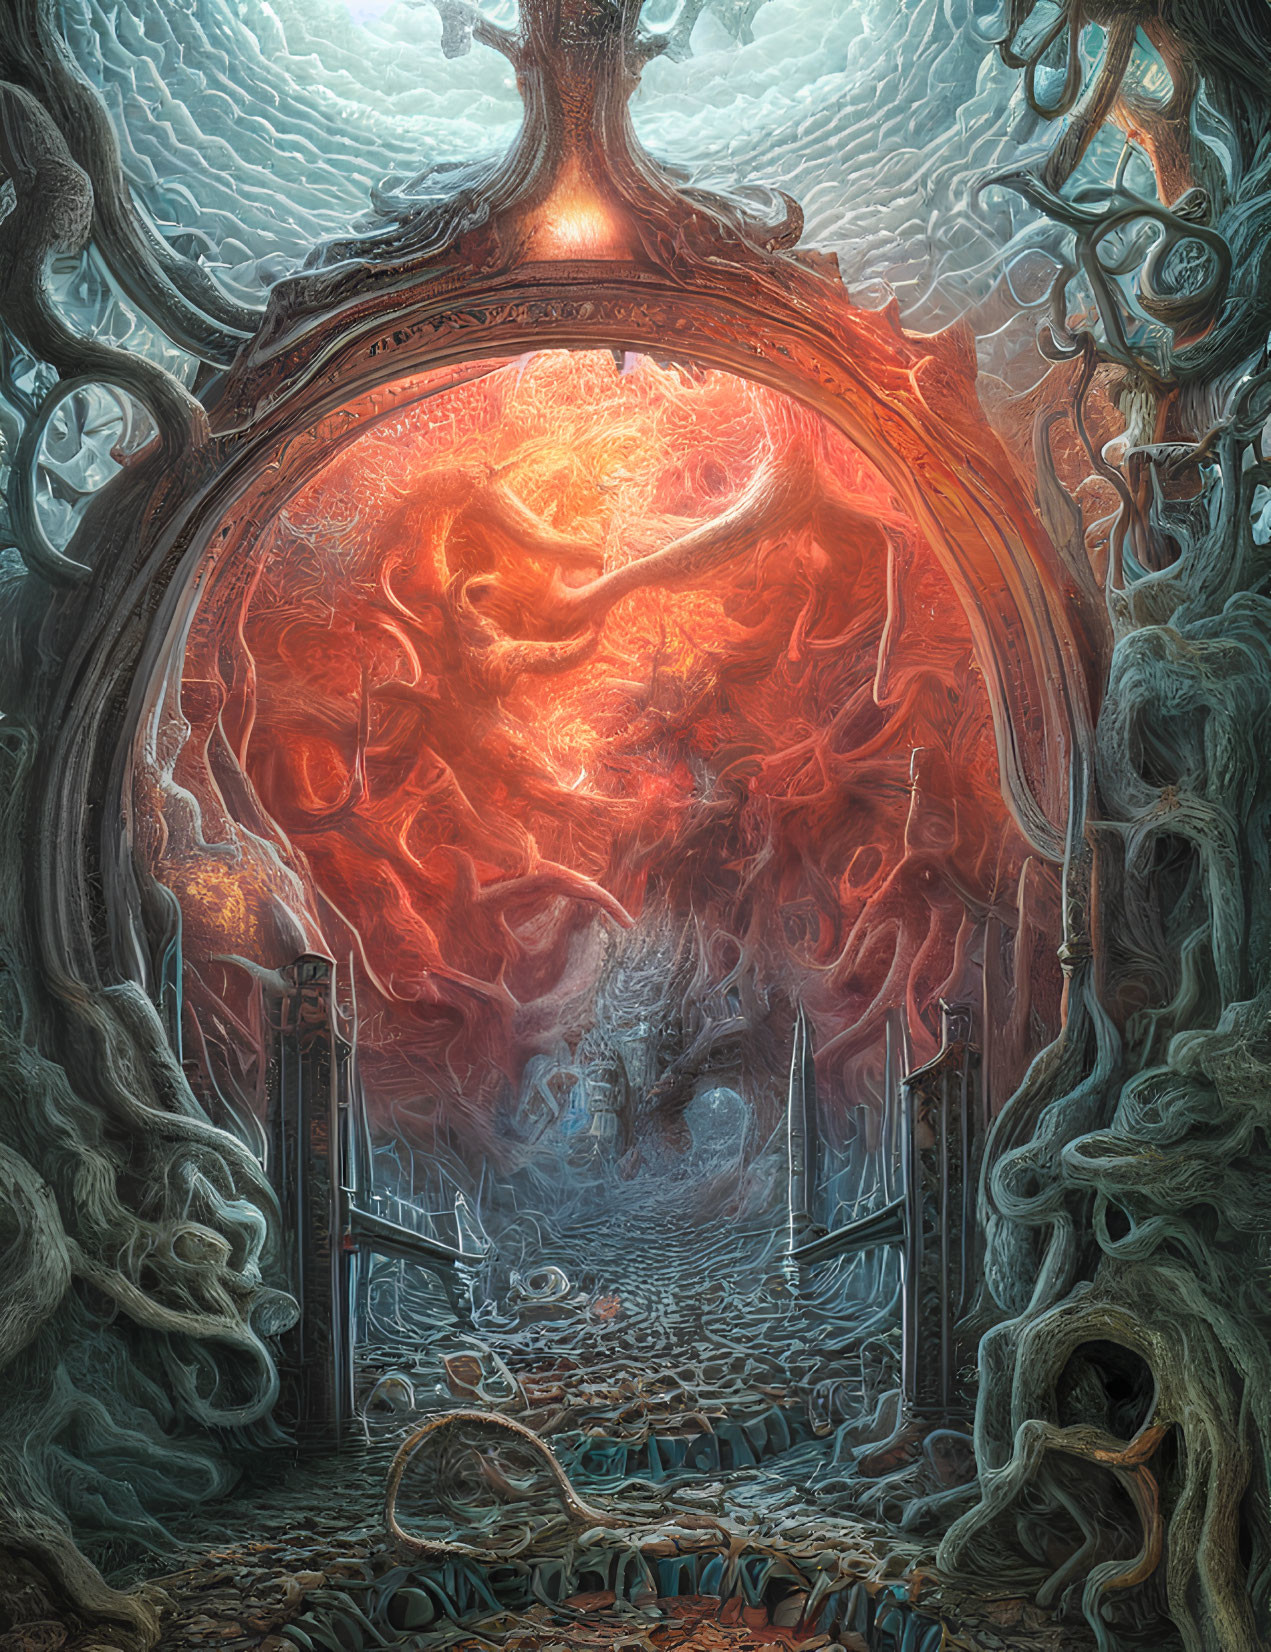 Ornate archway leading to fiery vortex and twisted structures